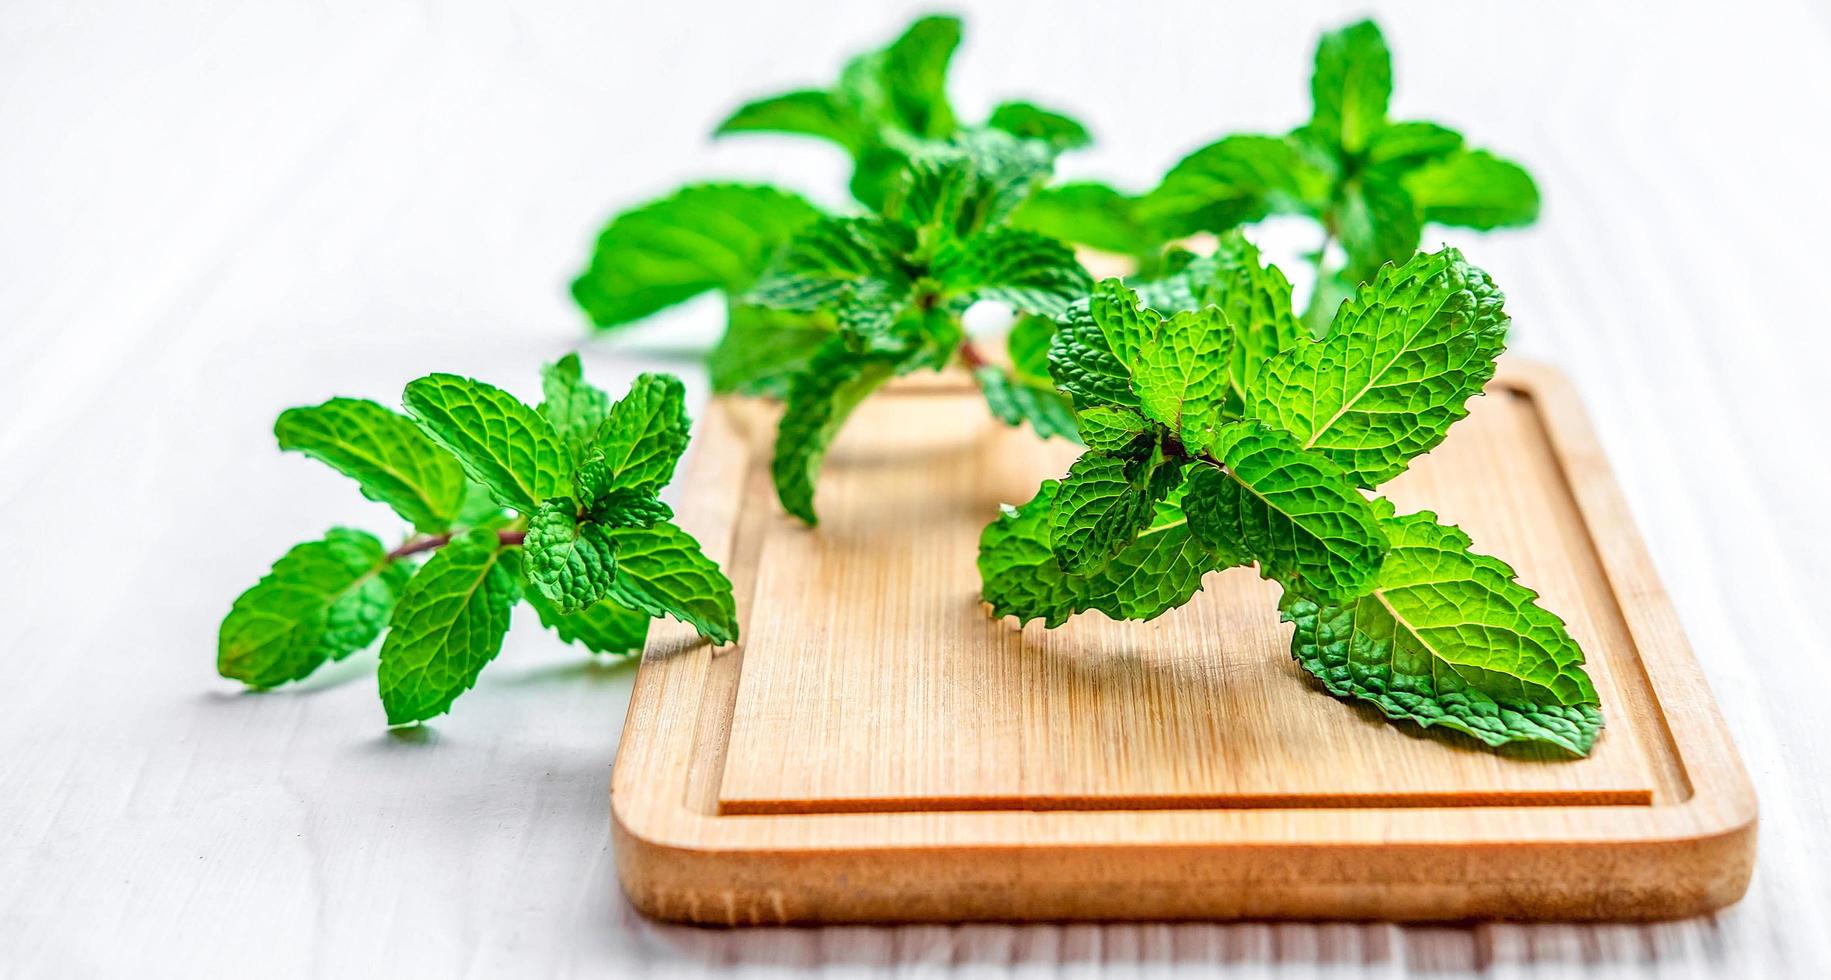 Mint leaf or Fresh mint on a wooden chopping board on white background photo